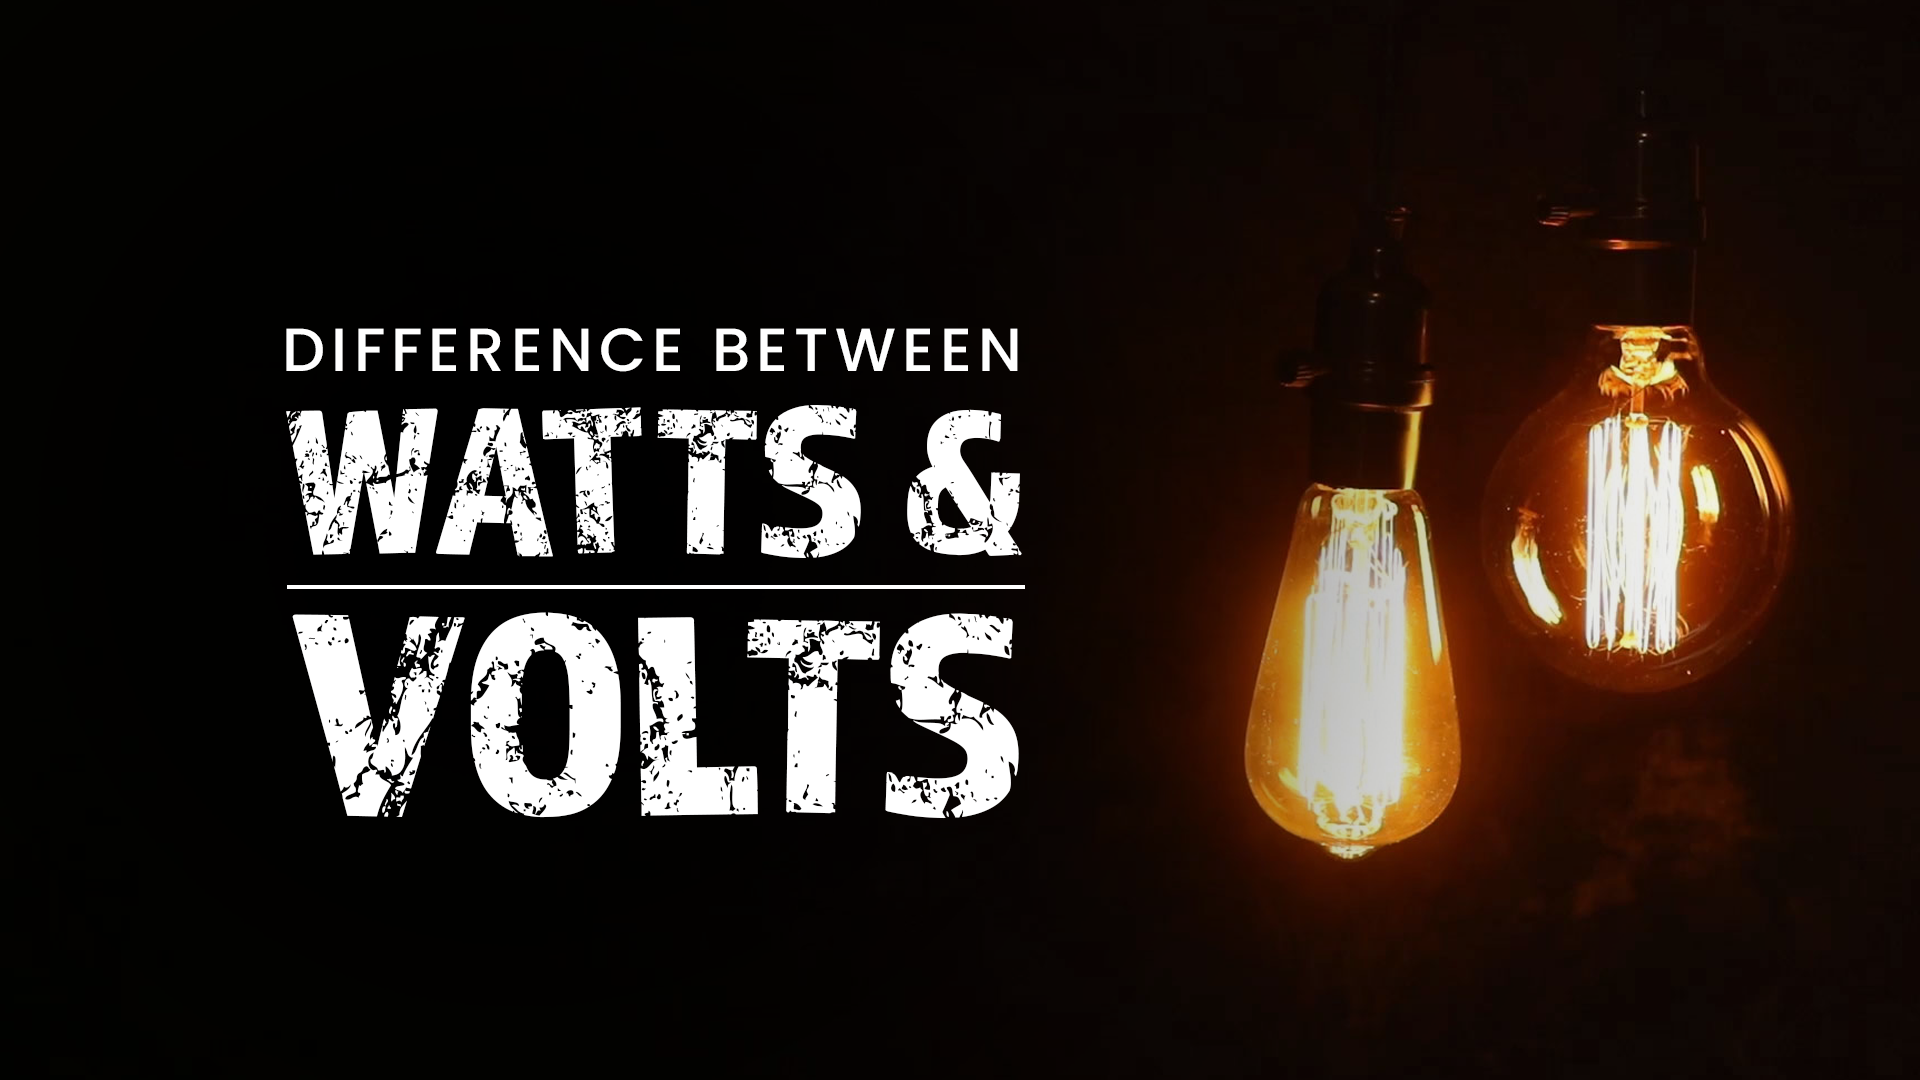 Difference Between Watts and Volts